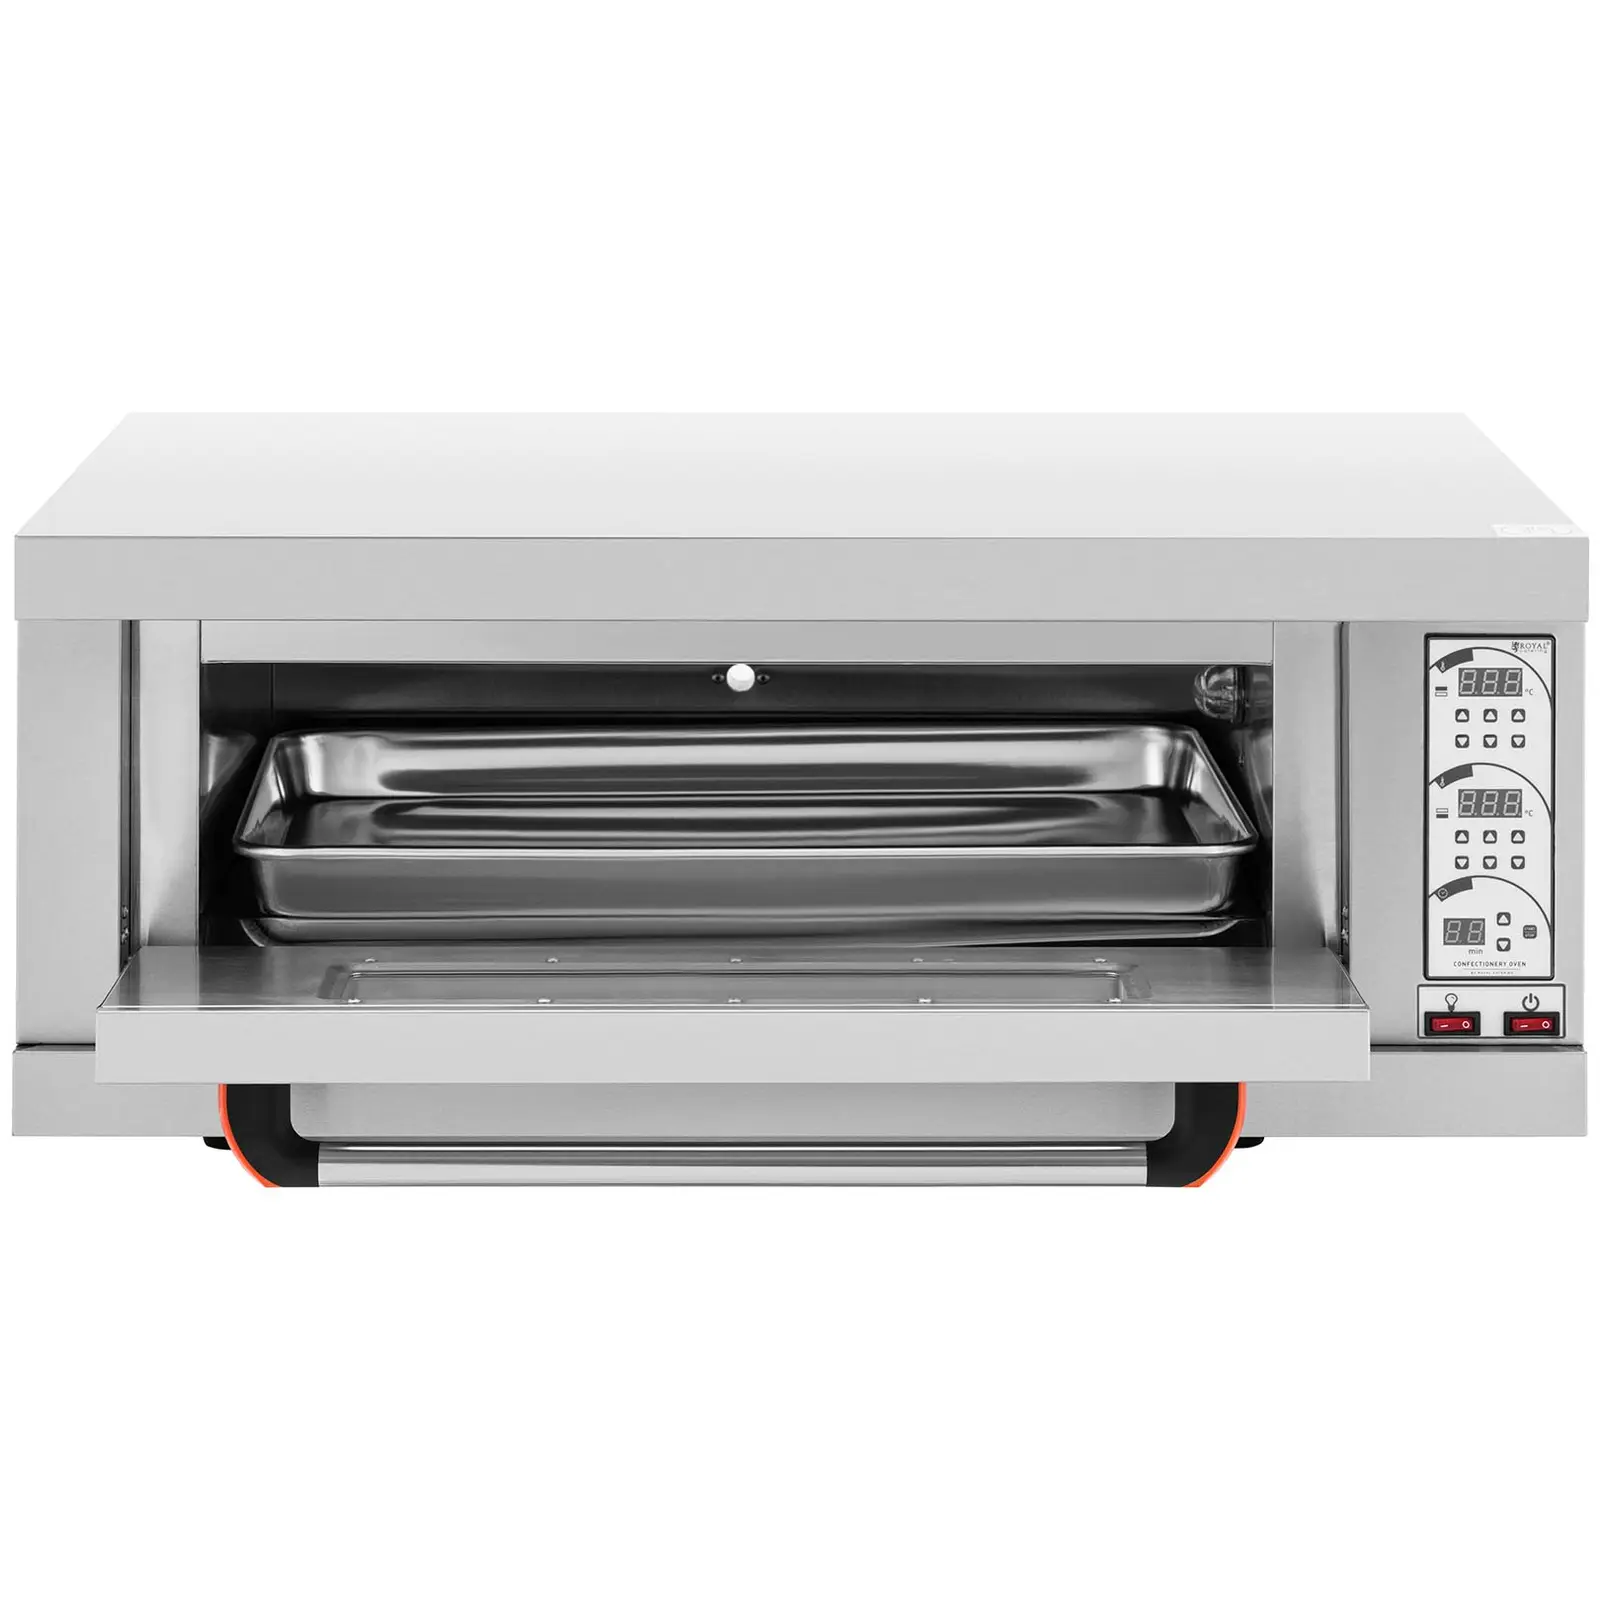 Andrahandssortering Pizzaugn - 1 kammare - 3200 W - Timer - Royal Catering